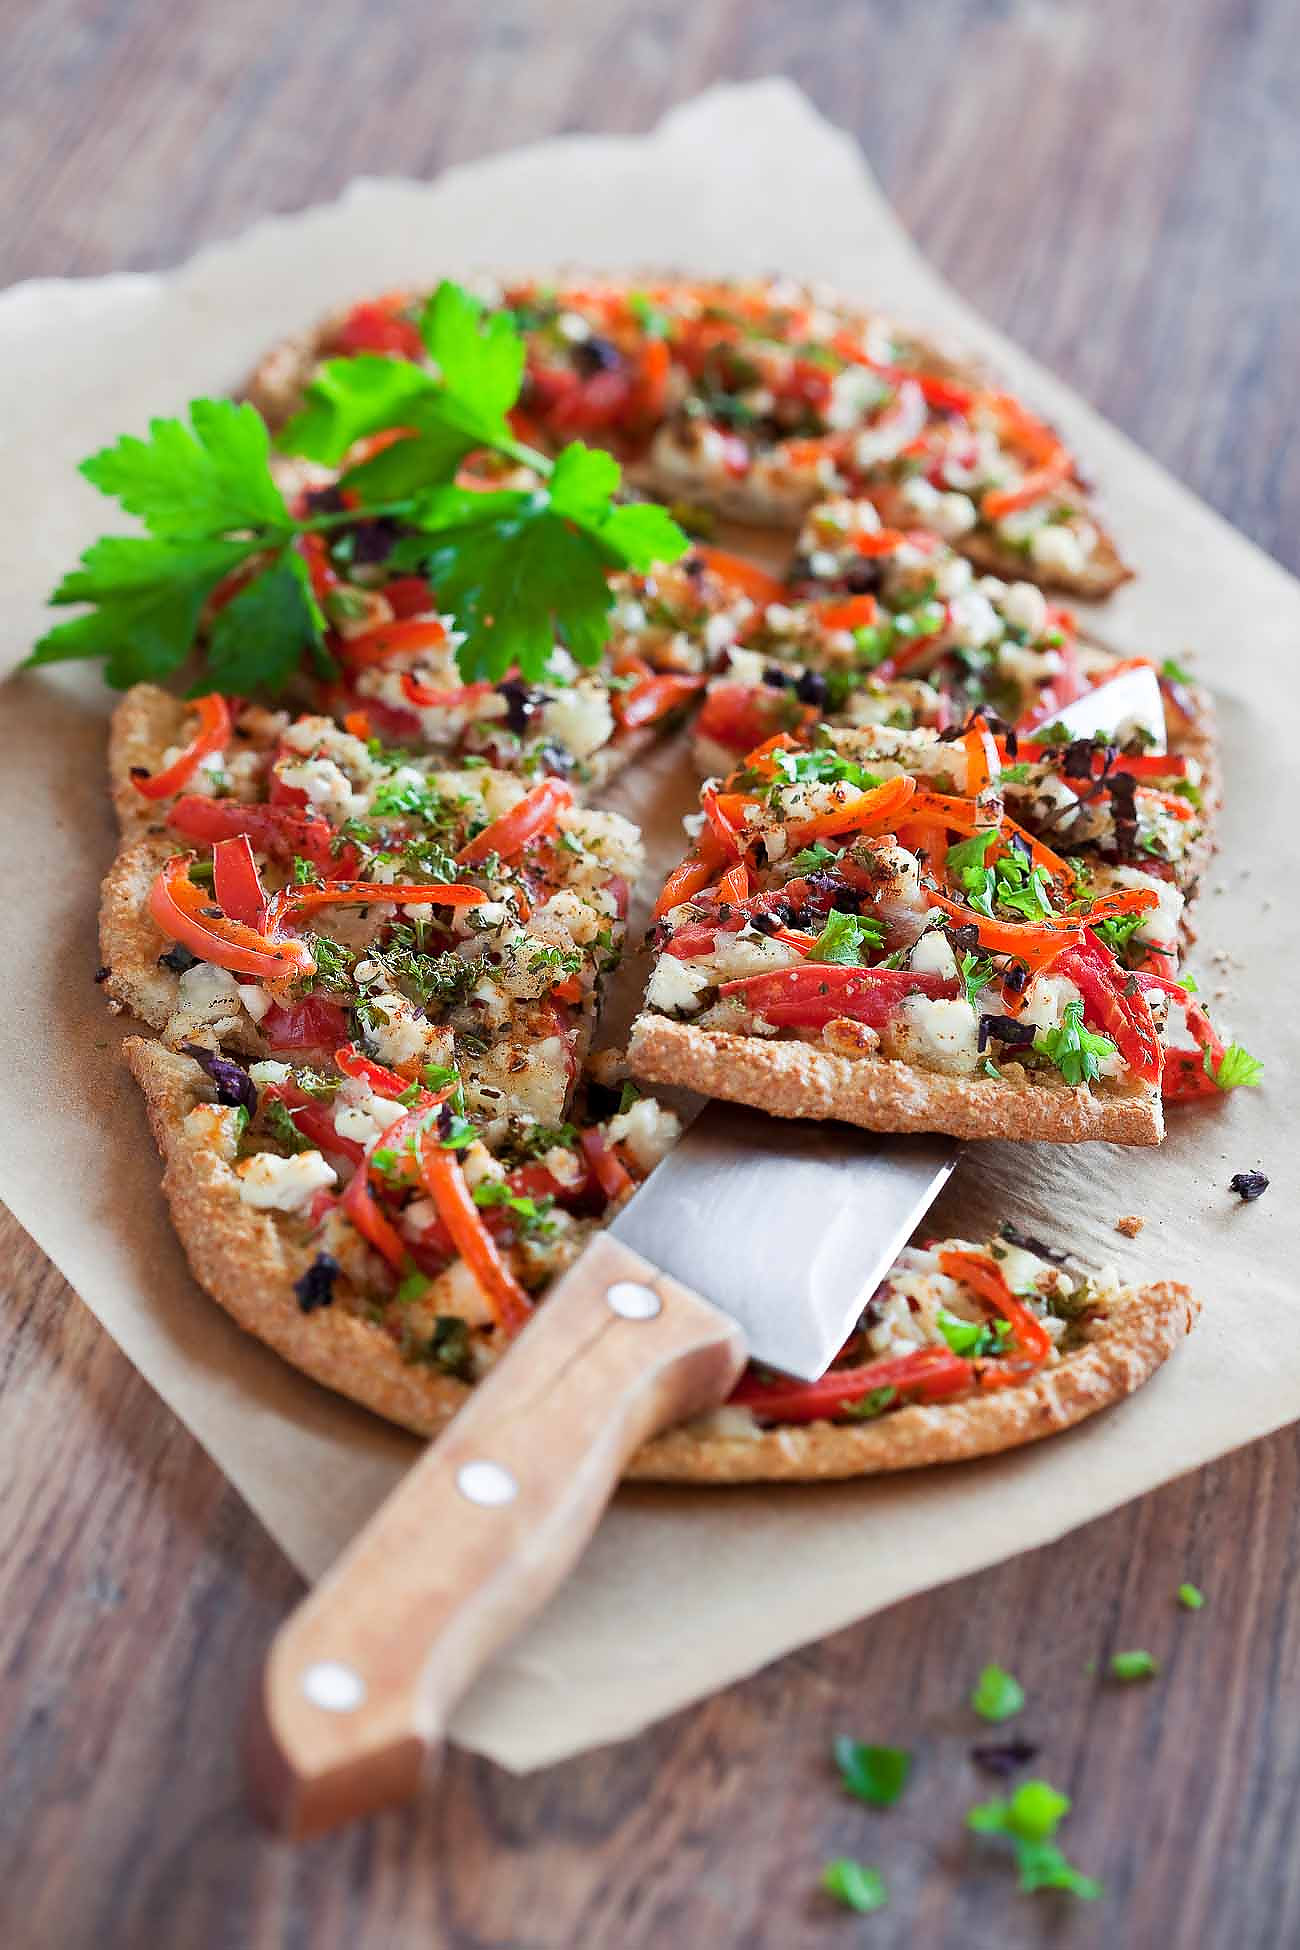 Roasted Vegetable Pizza Recipe With Oat Flour Crust